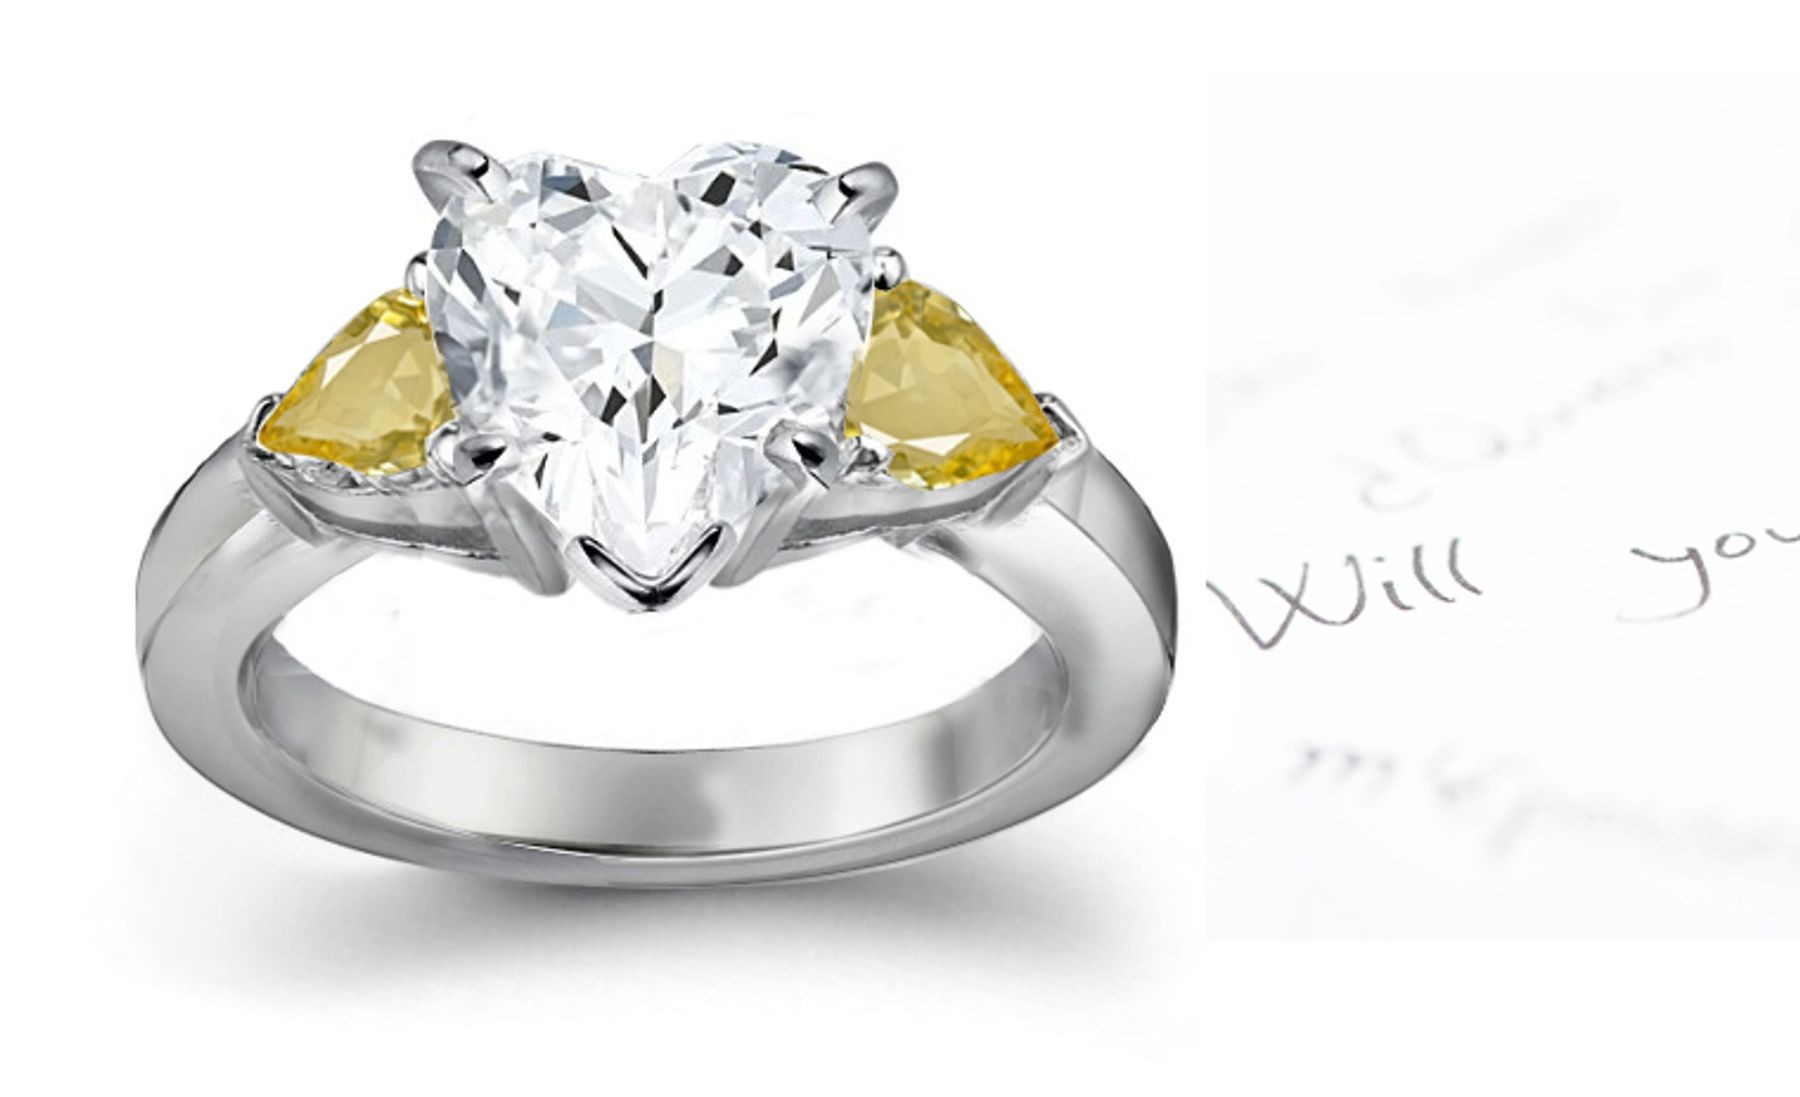 2013 Catalog No. 5 - Product Details: Beauty & Style: Yellow Pears Sapphire & Diamond Heart Designer Rings